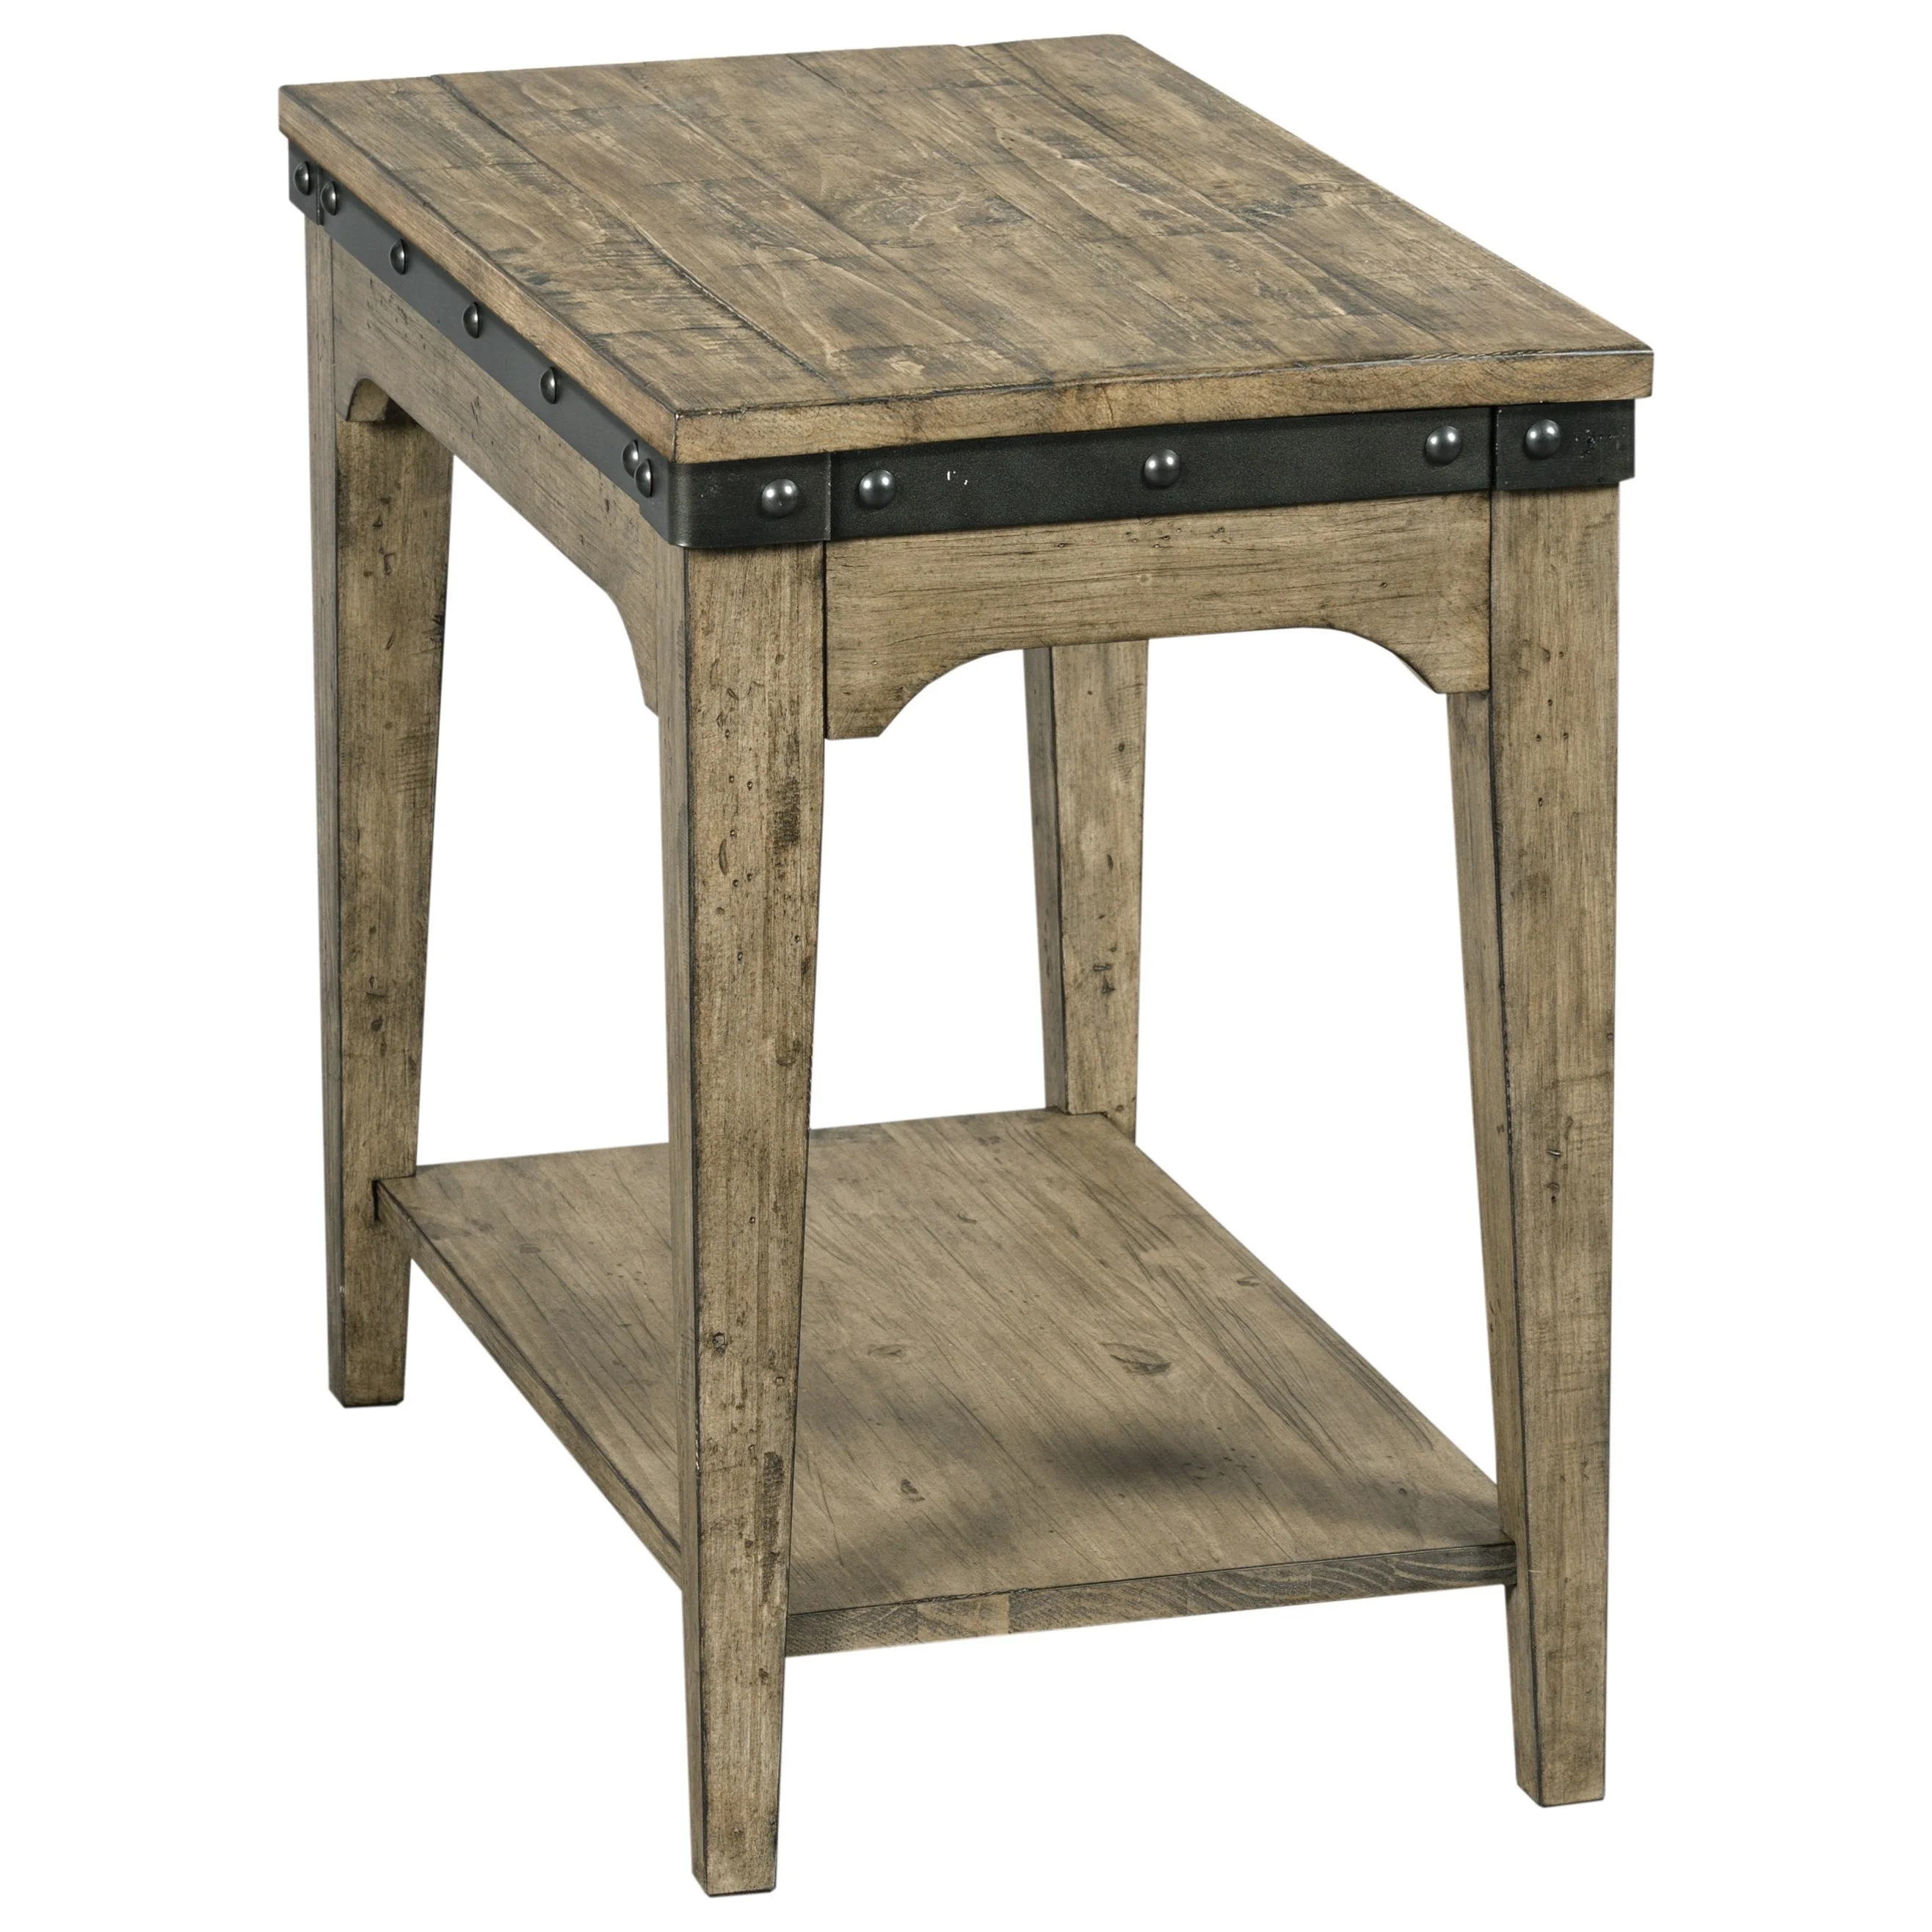 Kincaid Furniture Plank Road 706 916s Artisans Solid Wood Chairside Table Powells Furniture